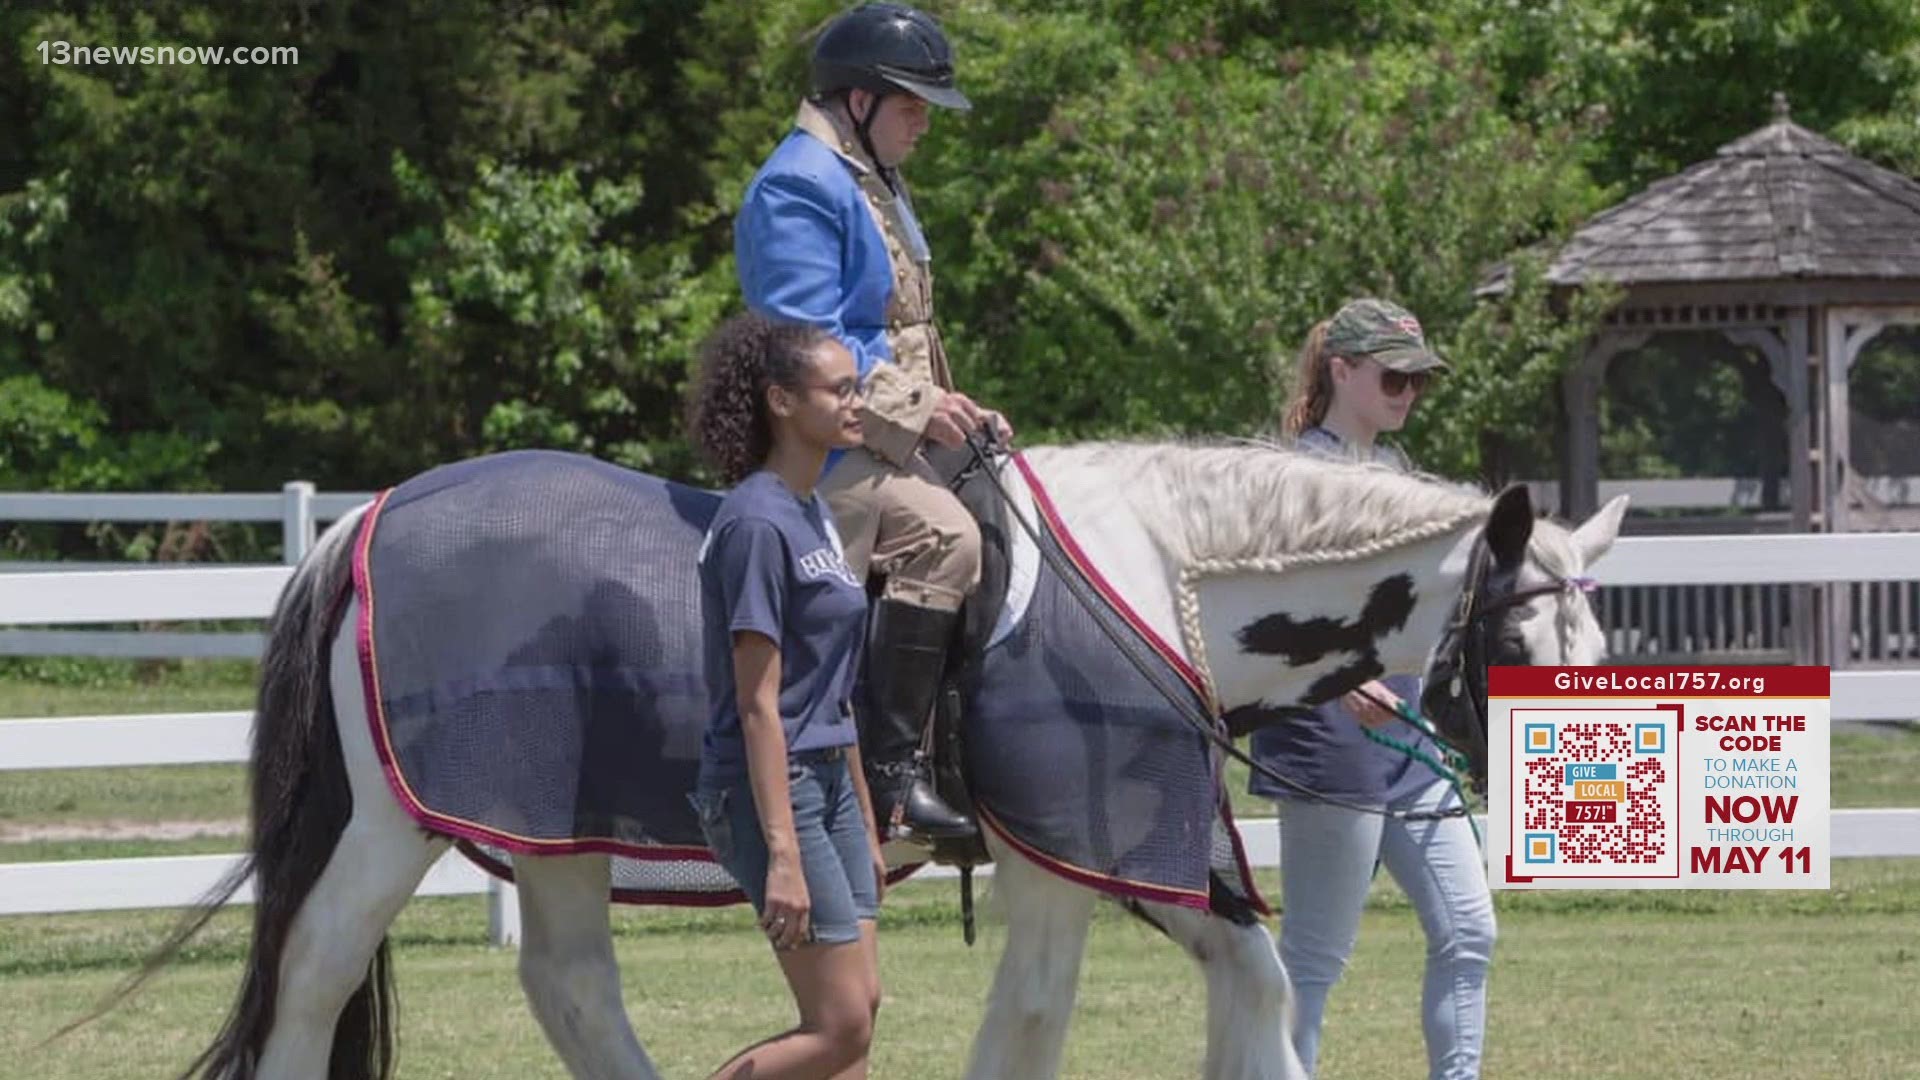 COVID-19 has impacted critical therapy for people with mental and physical disabilities. EQUI-KIDS & EQUI-VETS are using equine therapy to help people heal.